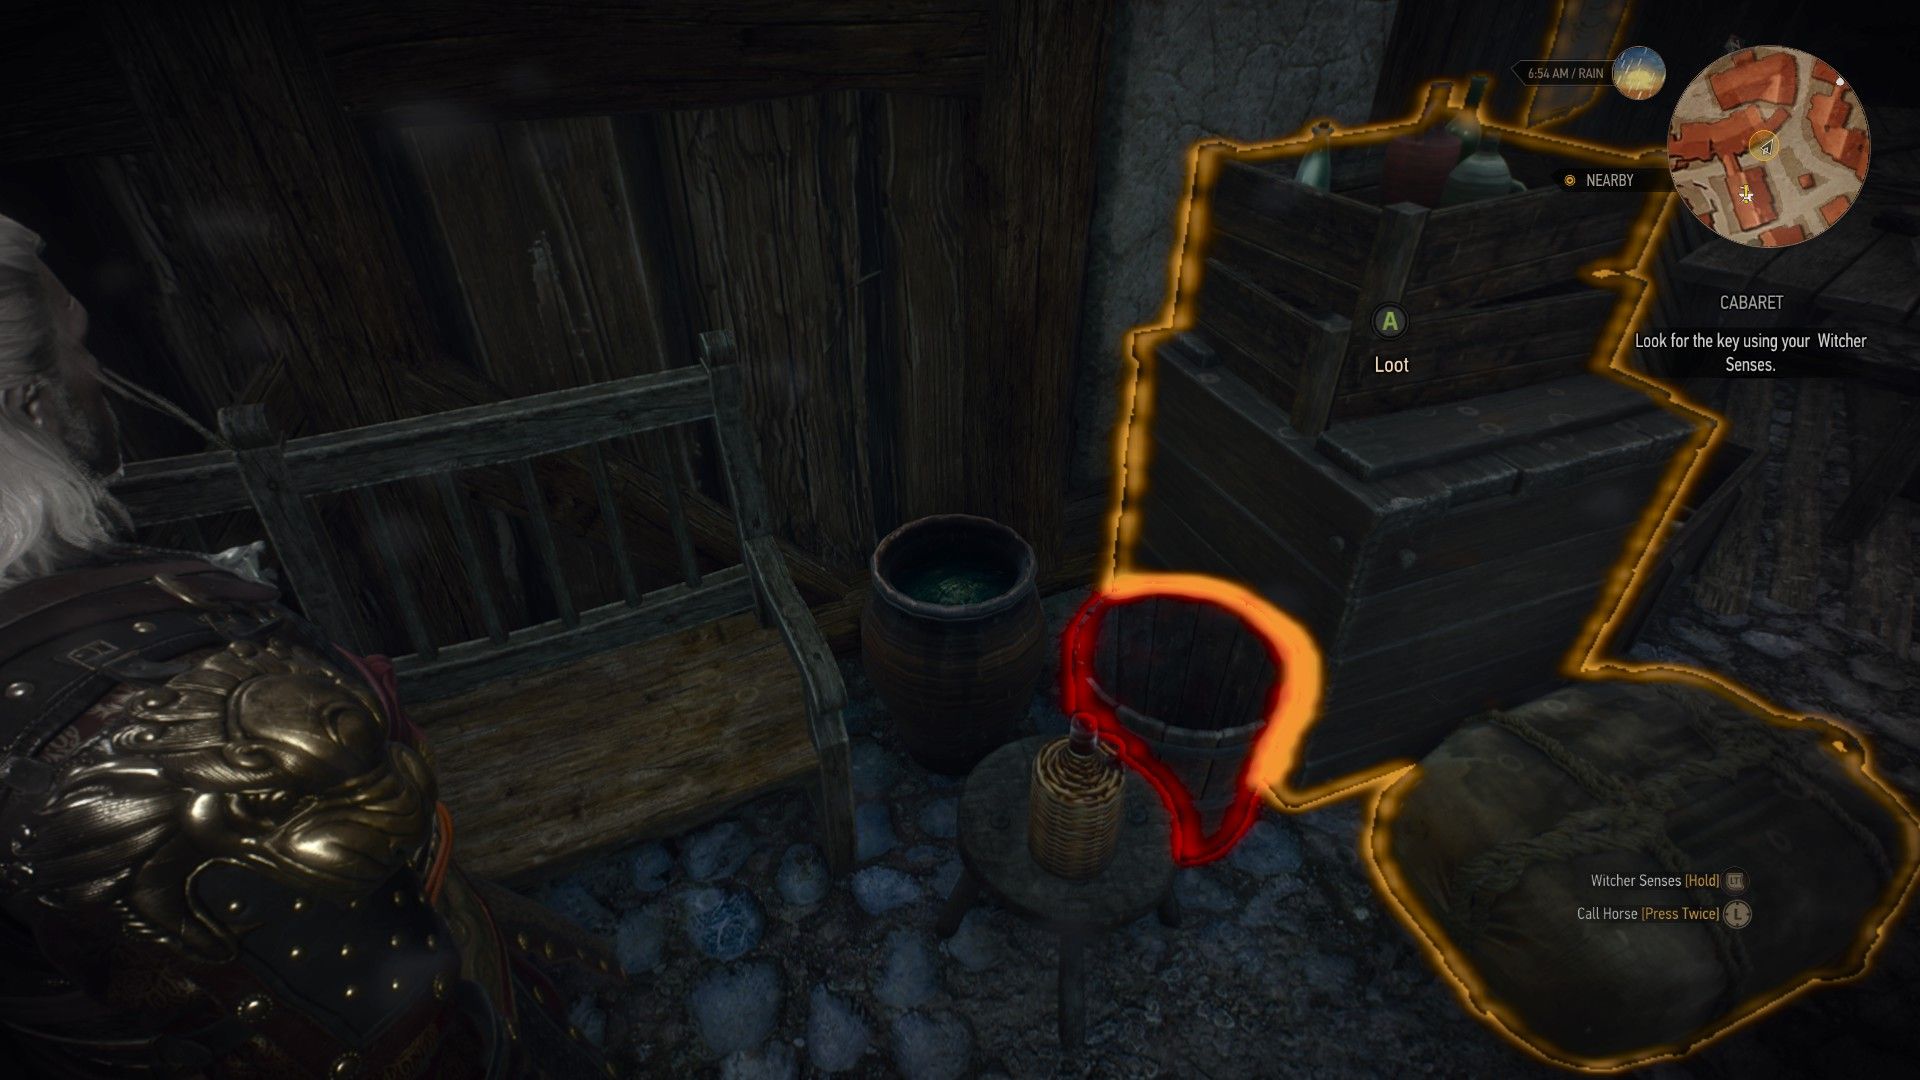 A screenshot from The Witcher 3 showing where to find a key inside a bucket.